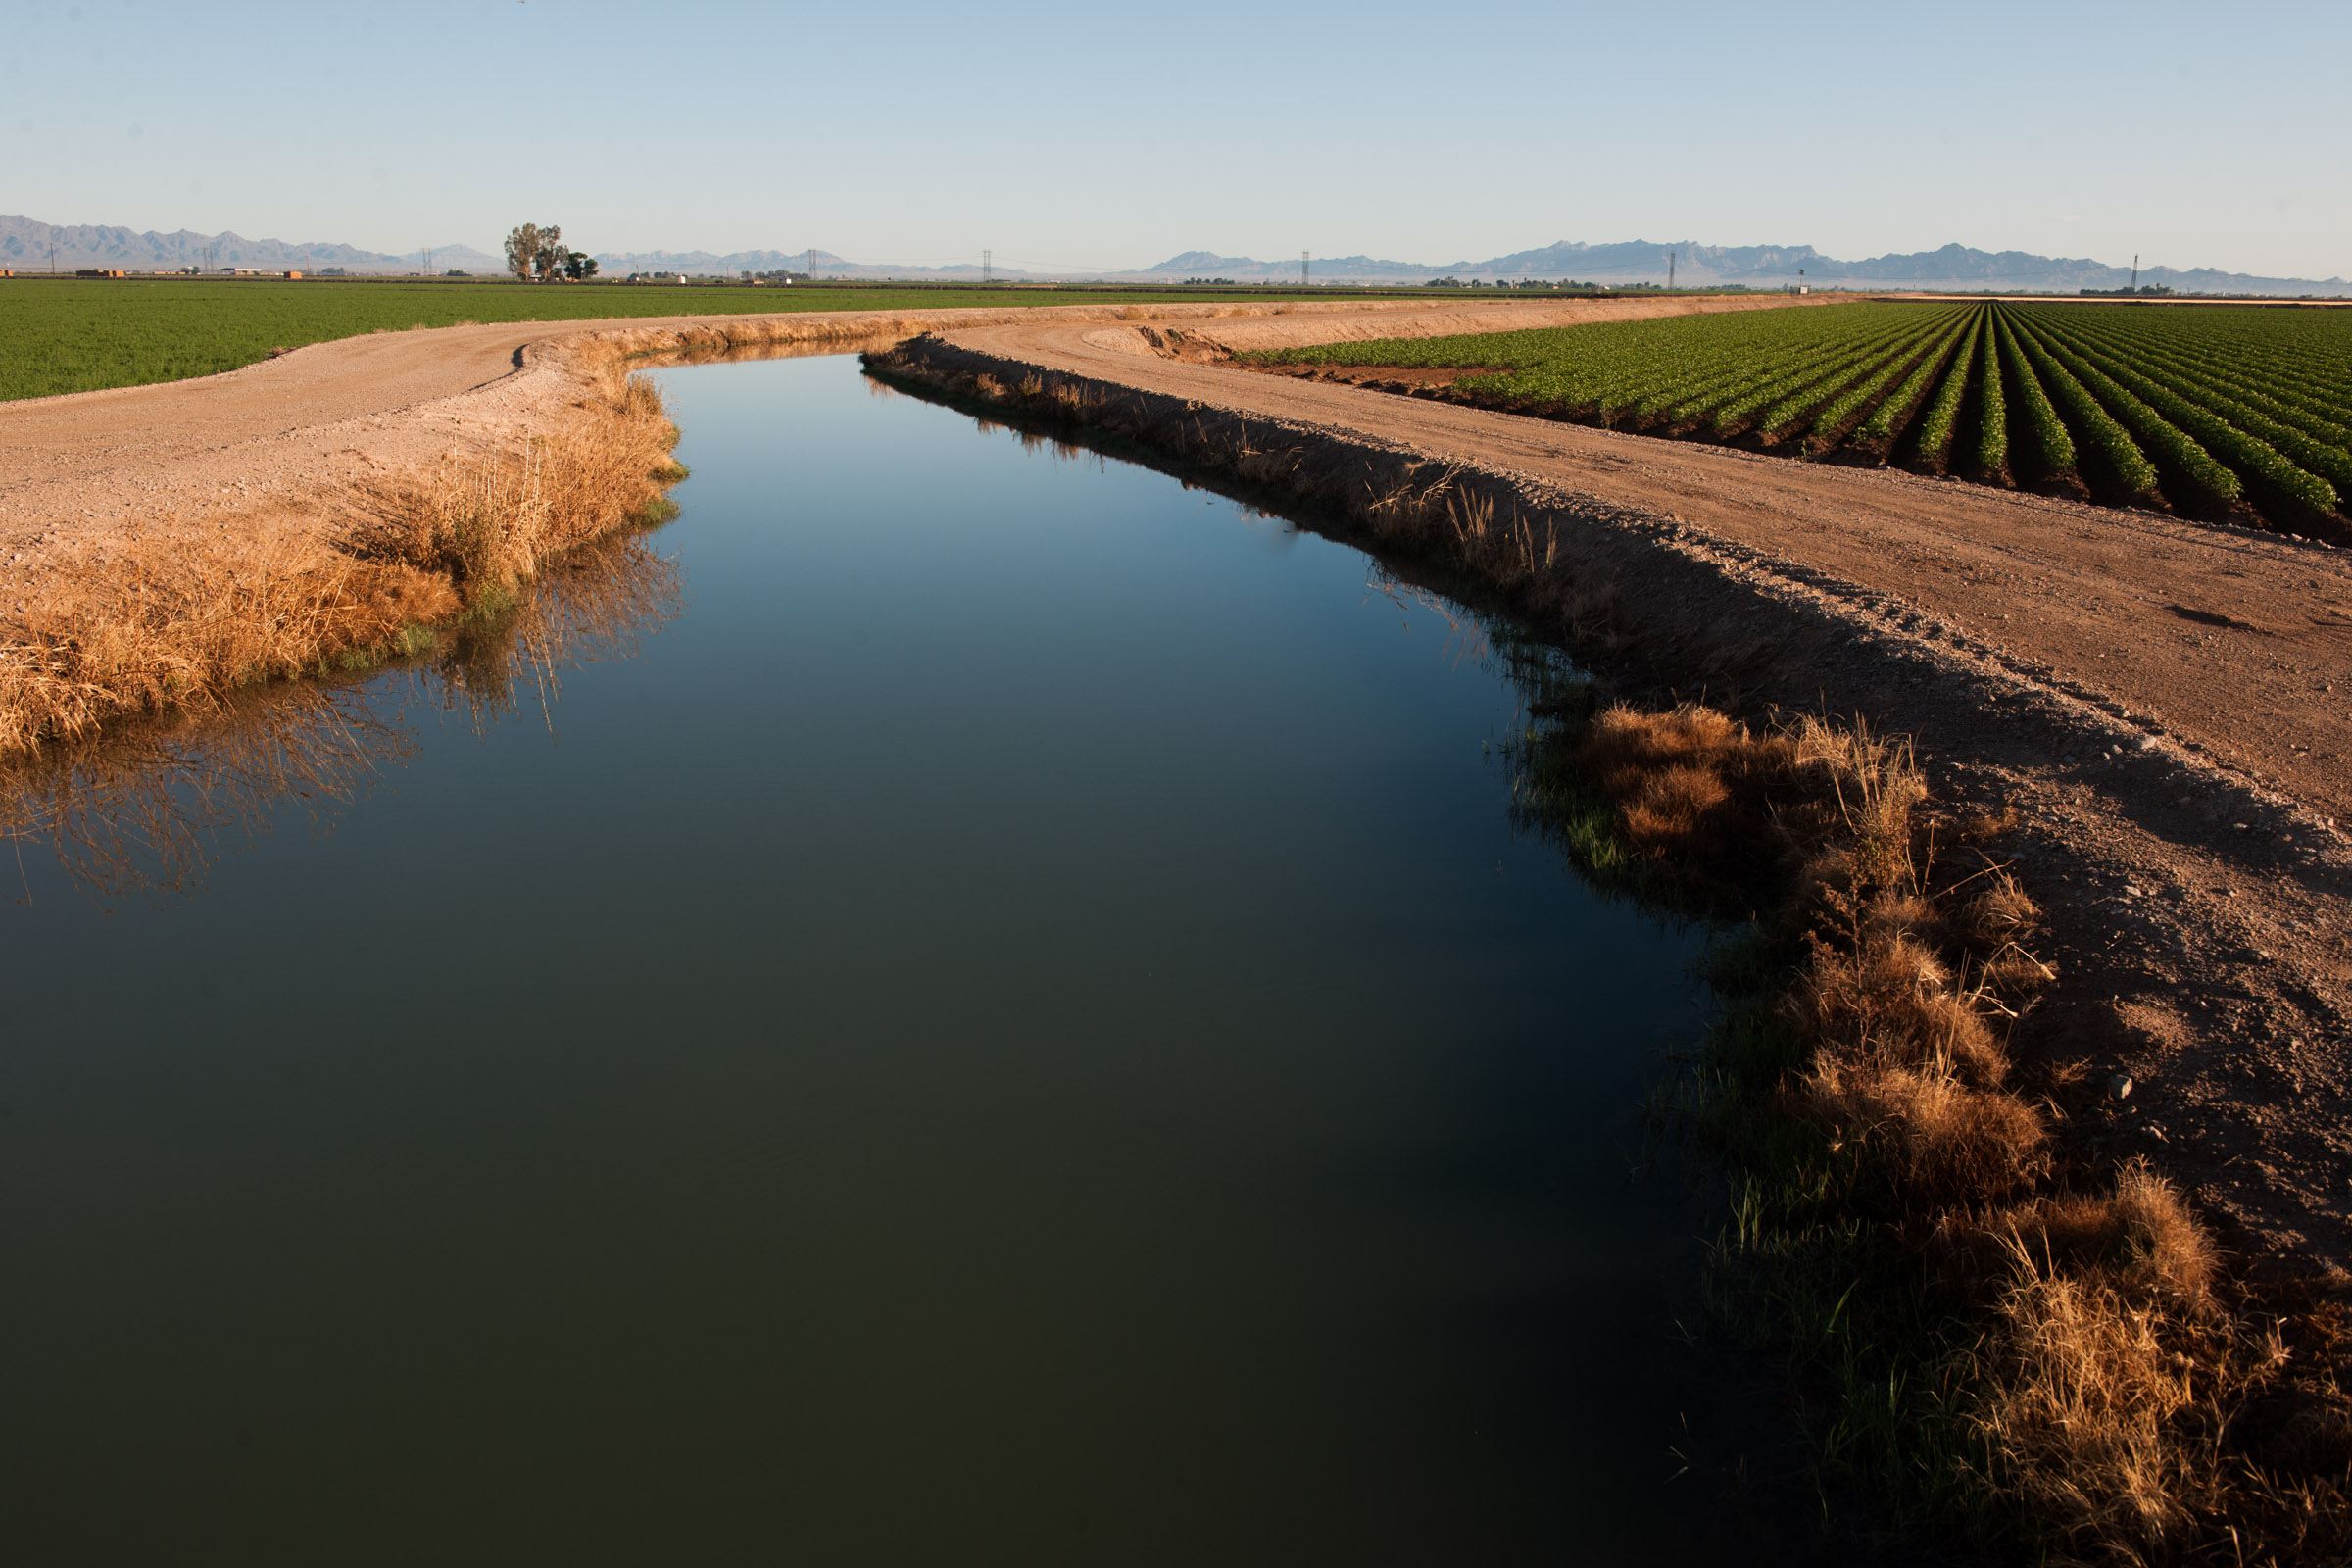 A canal moving water. Canals like this one may be used to move water in a water market.